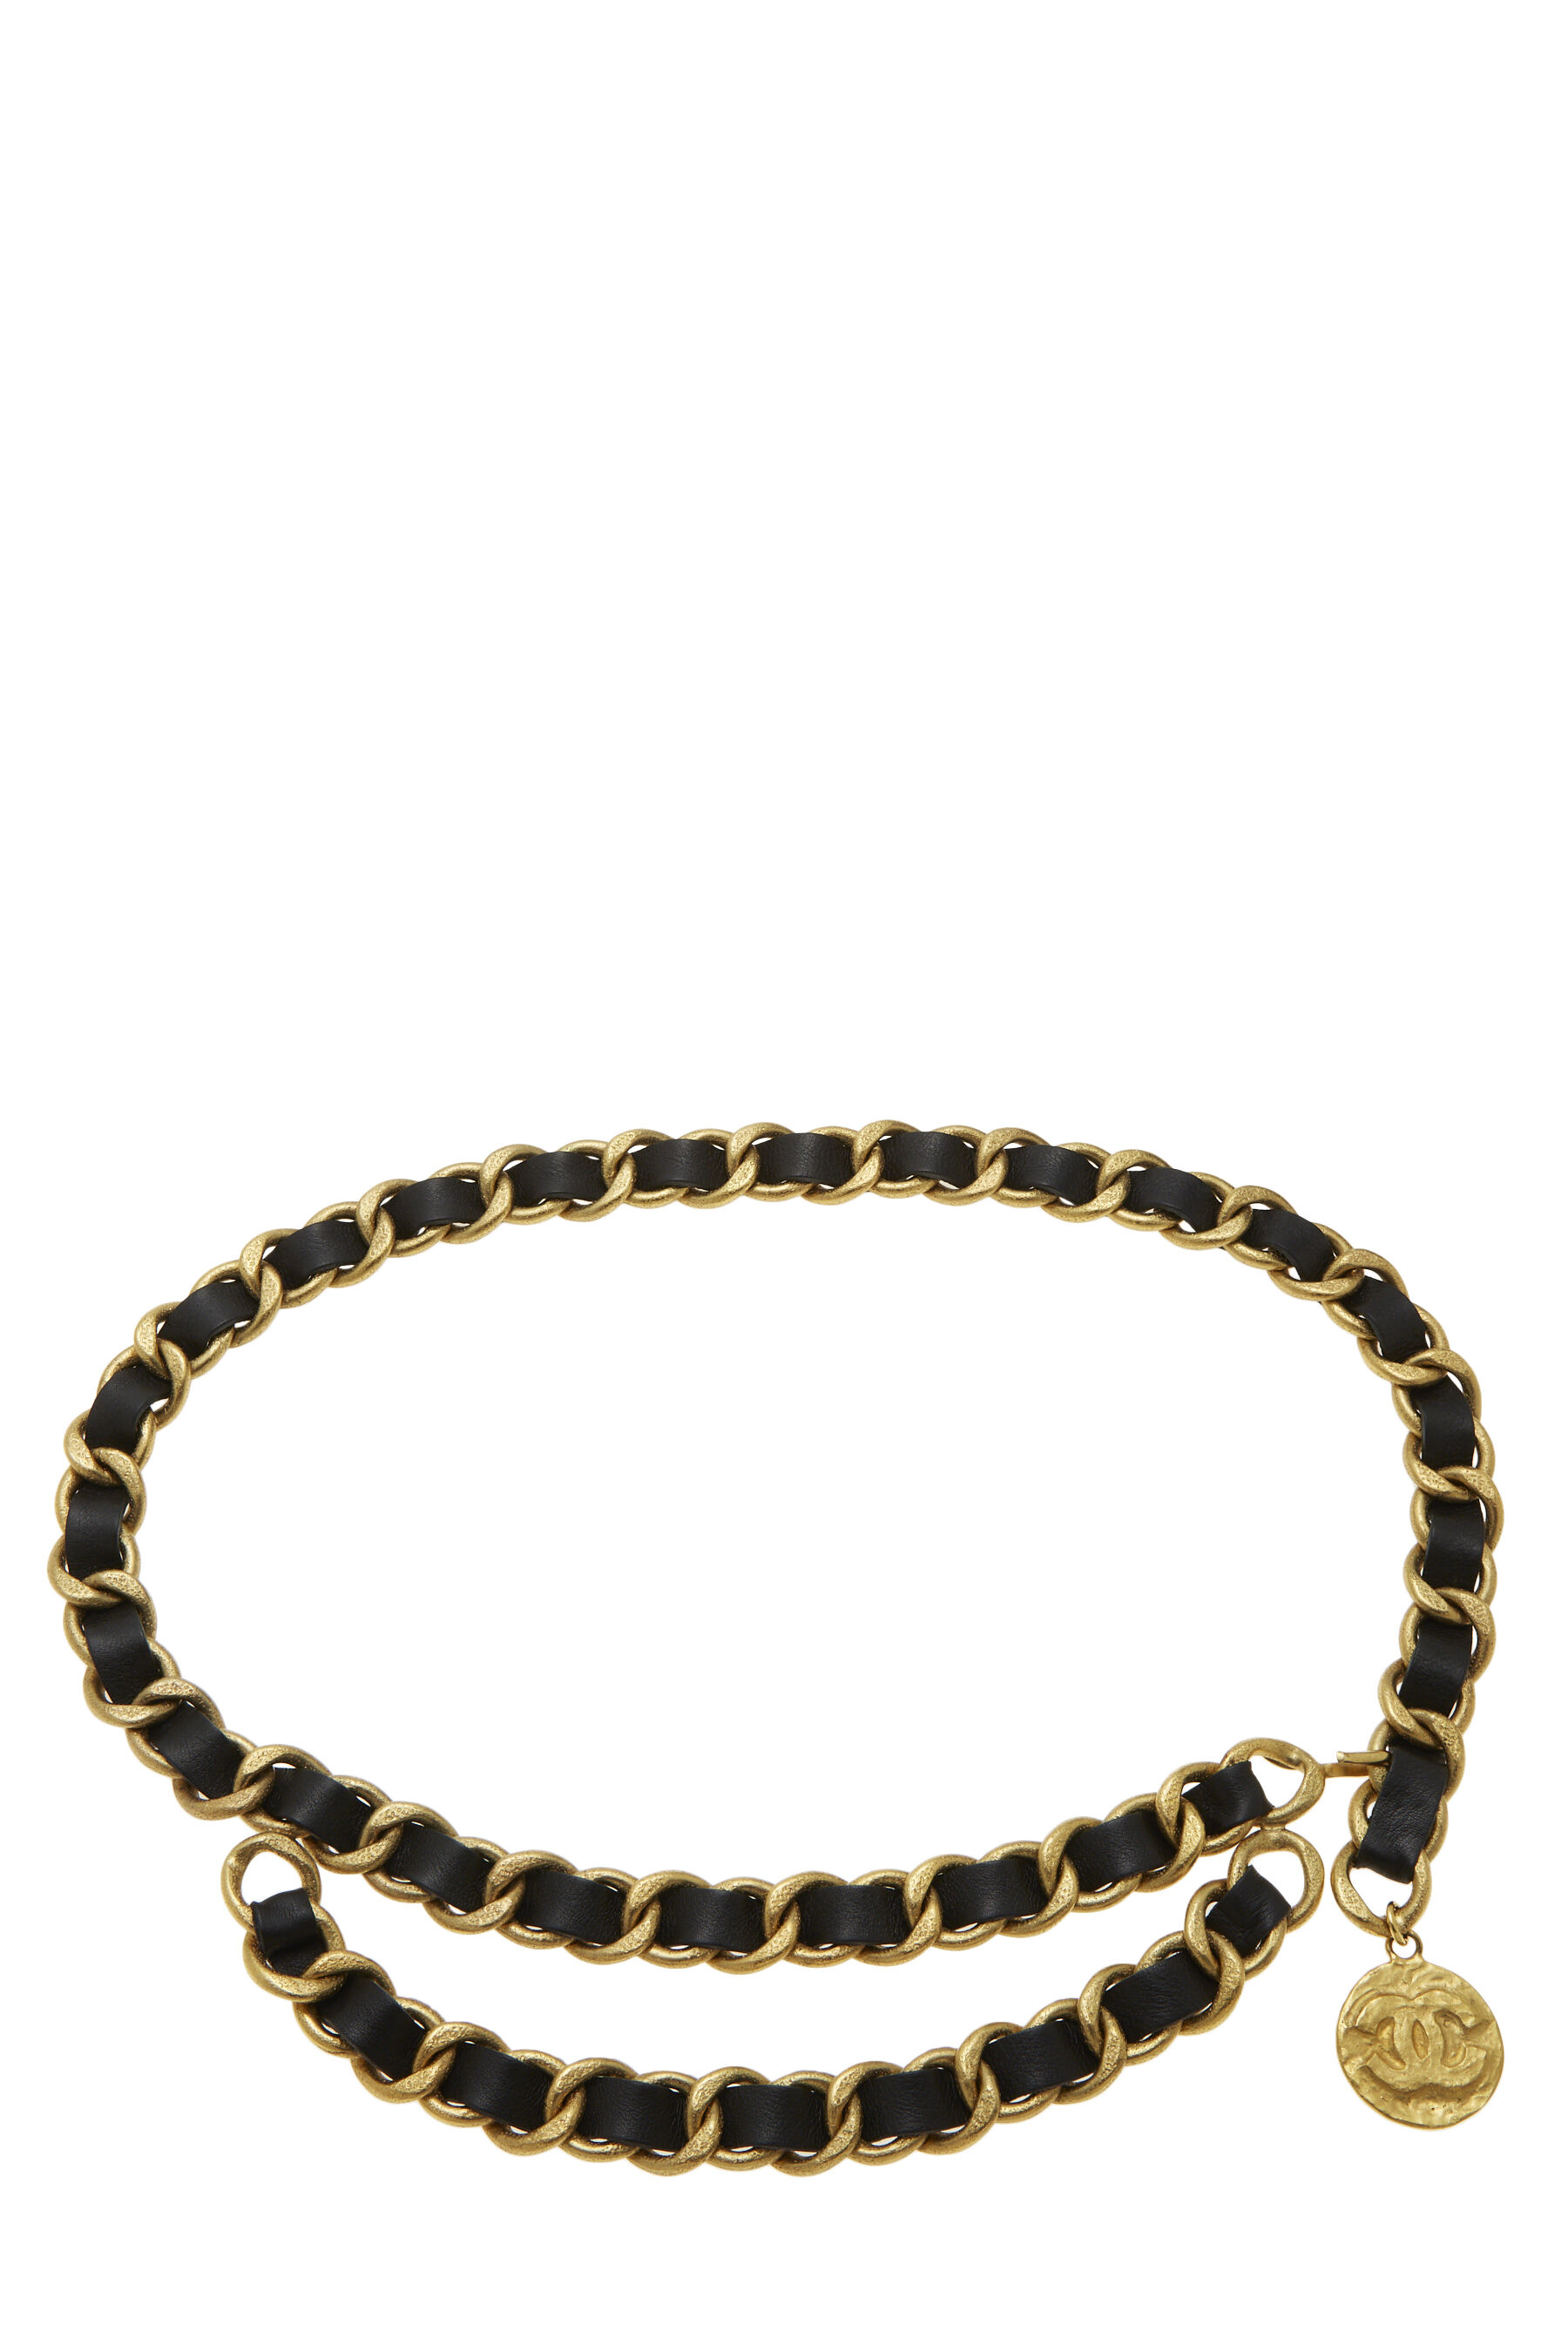 Chanel - Gold & Black Leather Chain Belt 2 Wide